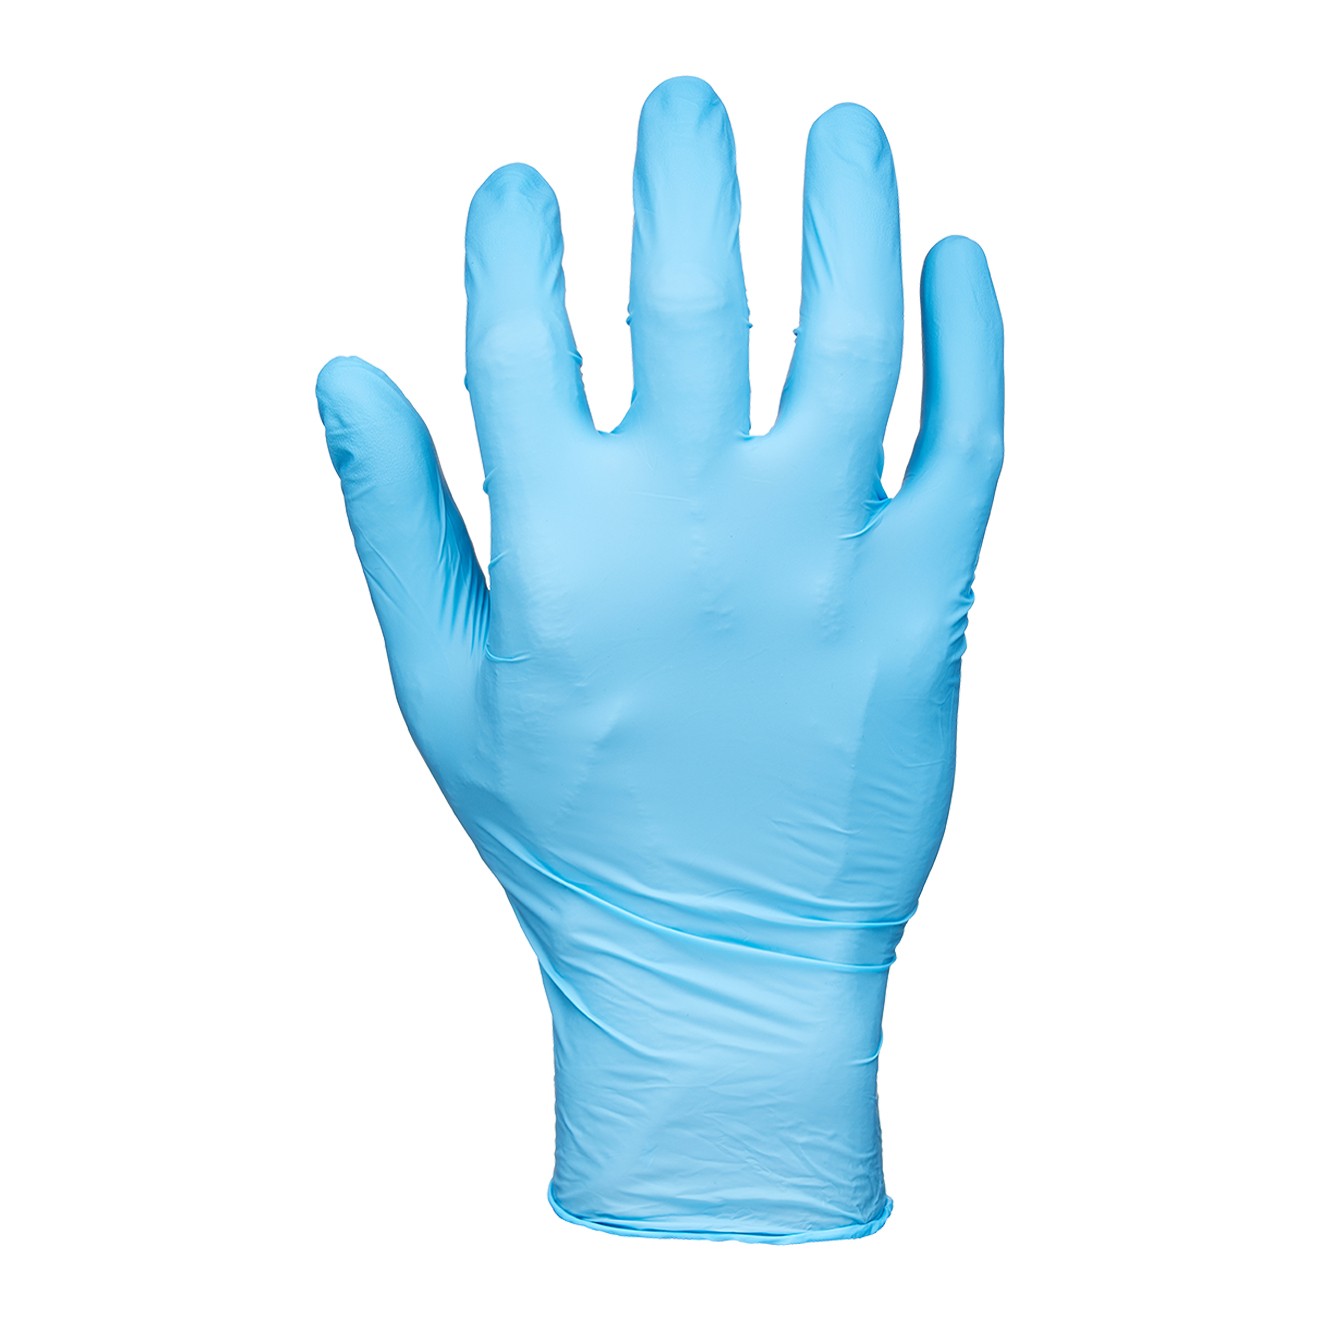 Dextra Touch Disposable Nitrile Glove